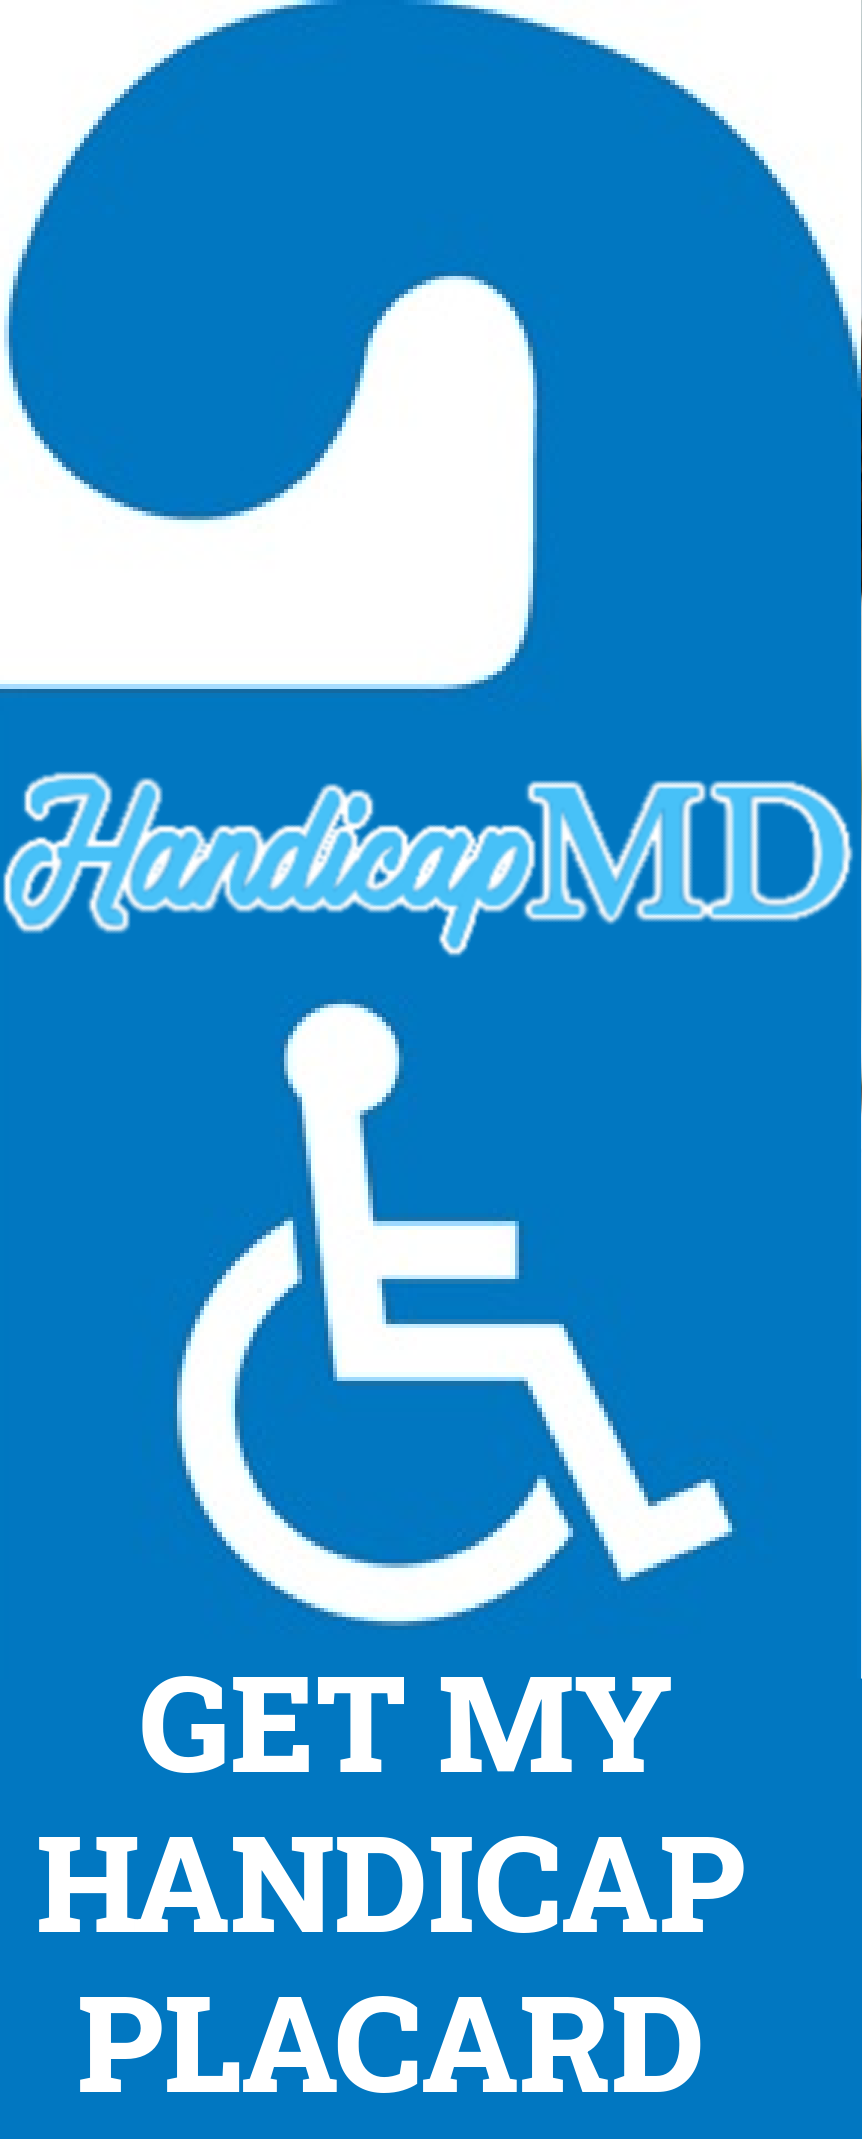 How to Replace a Lost or Stolen Handicap Placard in Indiana